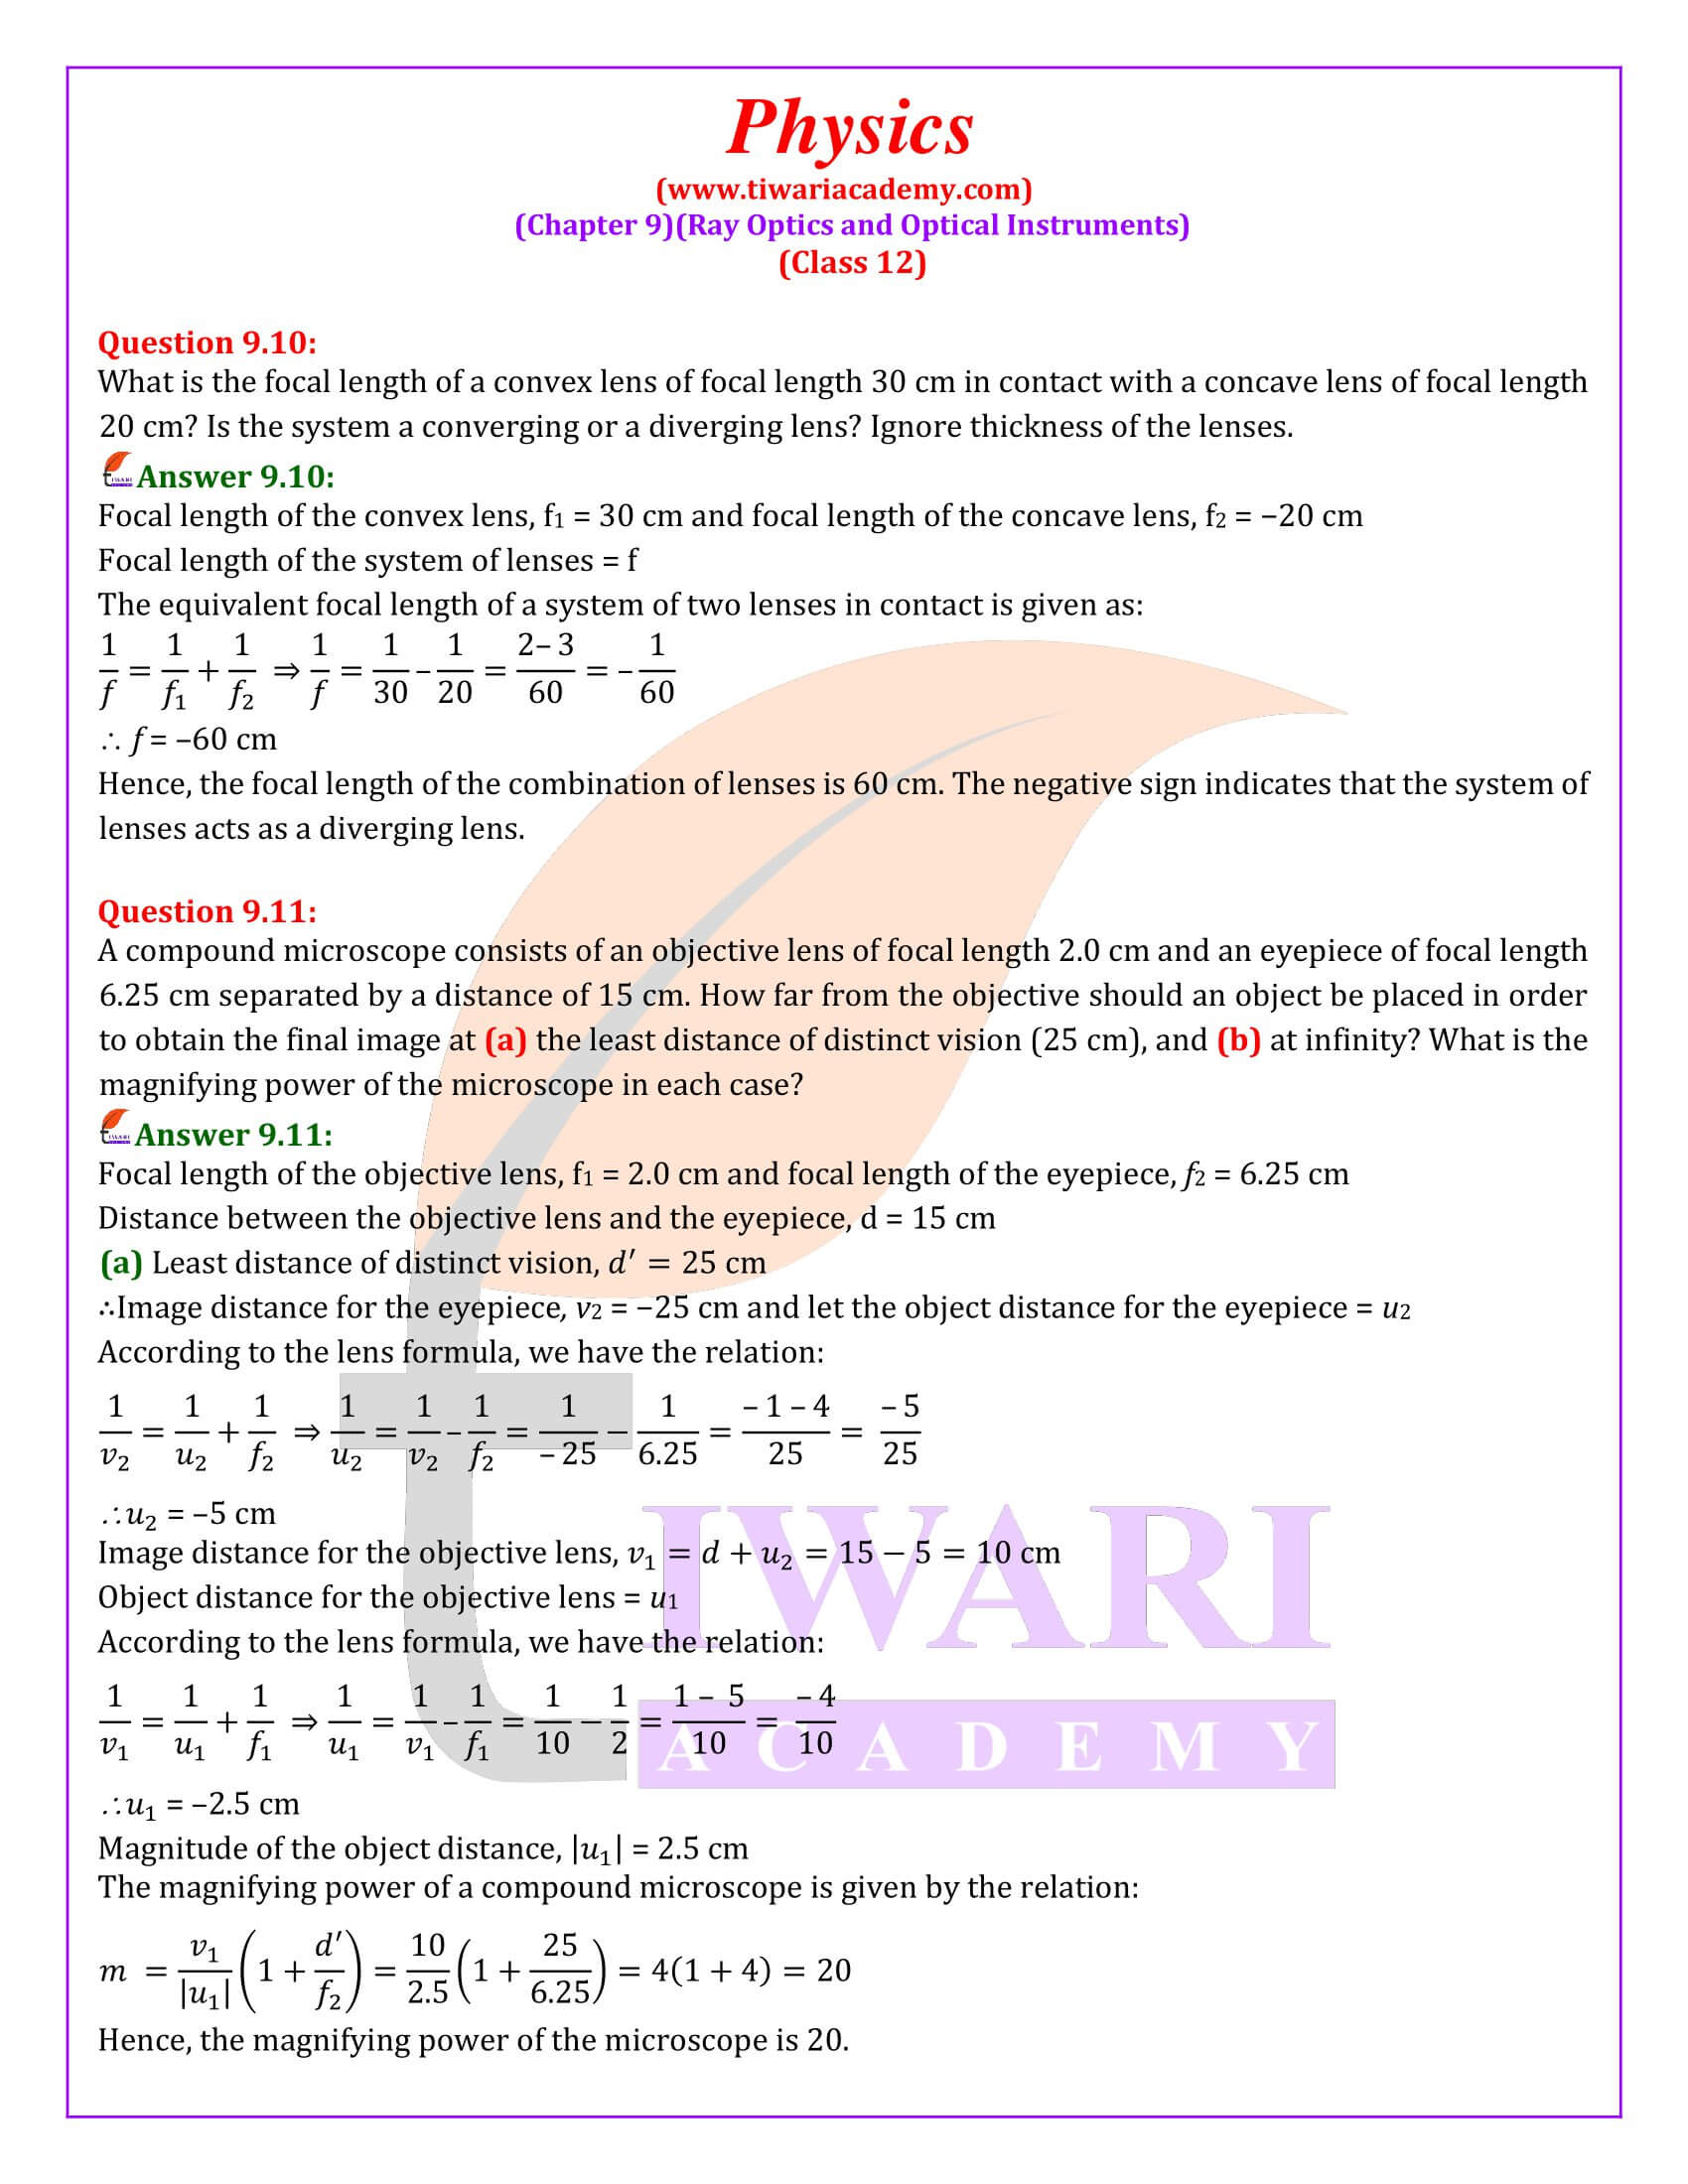 NCERT Solutions for Class 12 Physics Chapter 9 Based on new syllabus